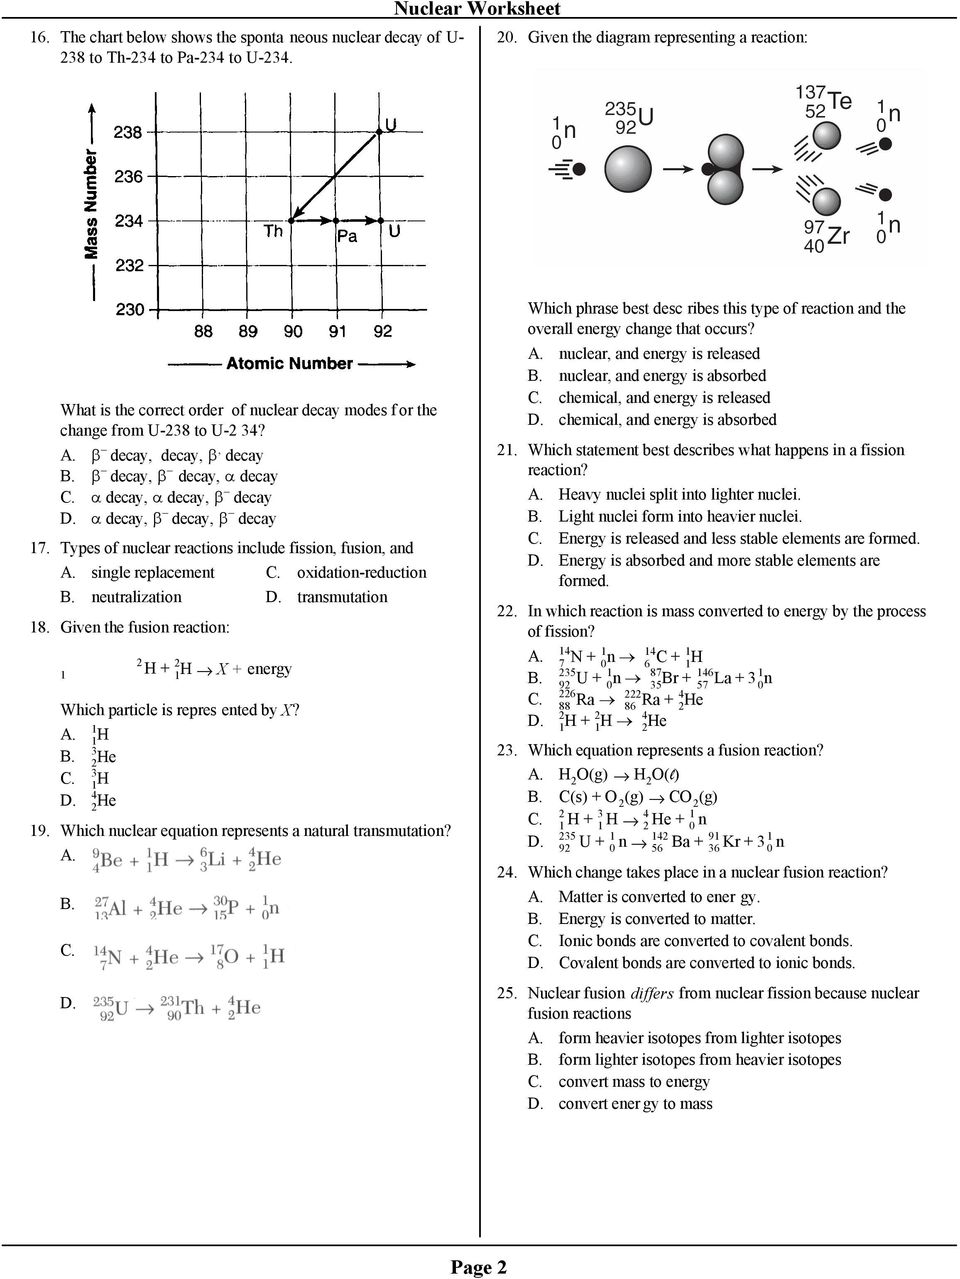 Regents Review Nuclear Worksheet Mr. Beauchamp - PDF Free Download Intended For Nuclear Chemistry Worksheet Answer Key